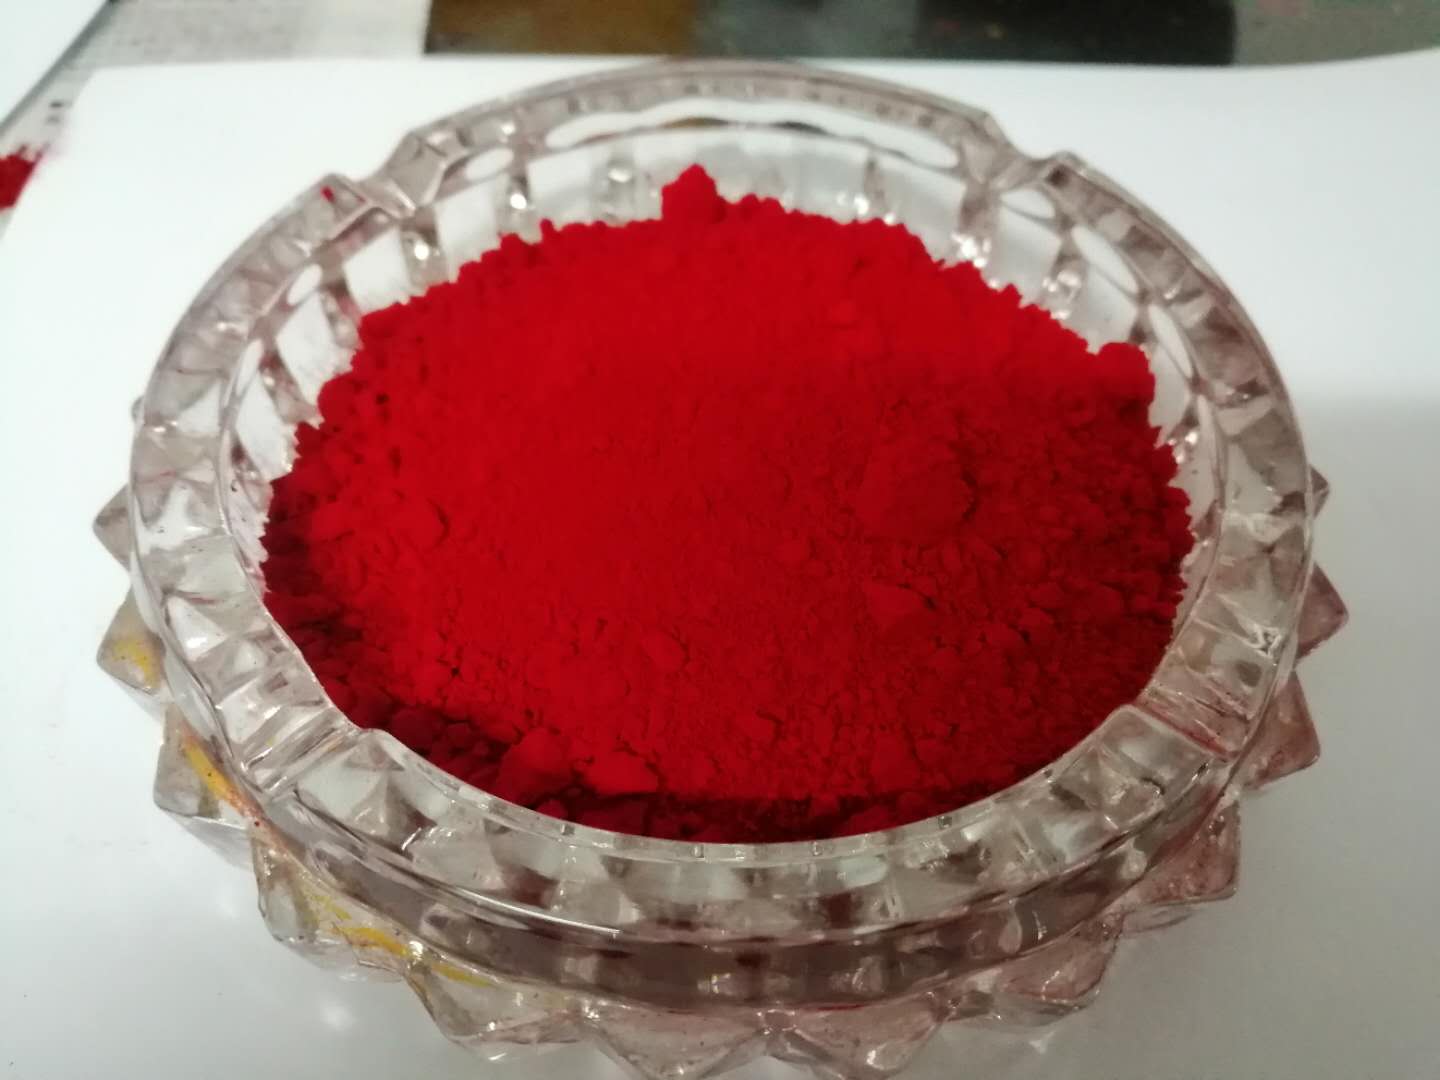 Pigment Red 57:1 Insoluble In Water High Heat Resistance Highly Recommend For Wax Coating, Plastic And Oil Based 